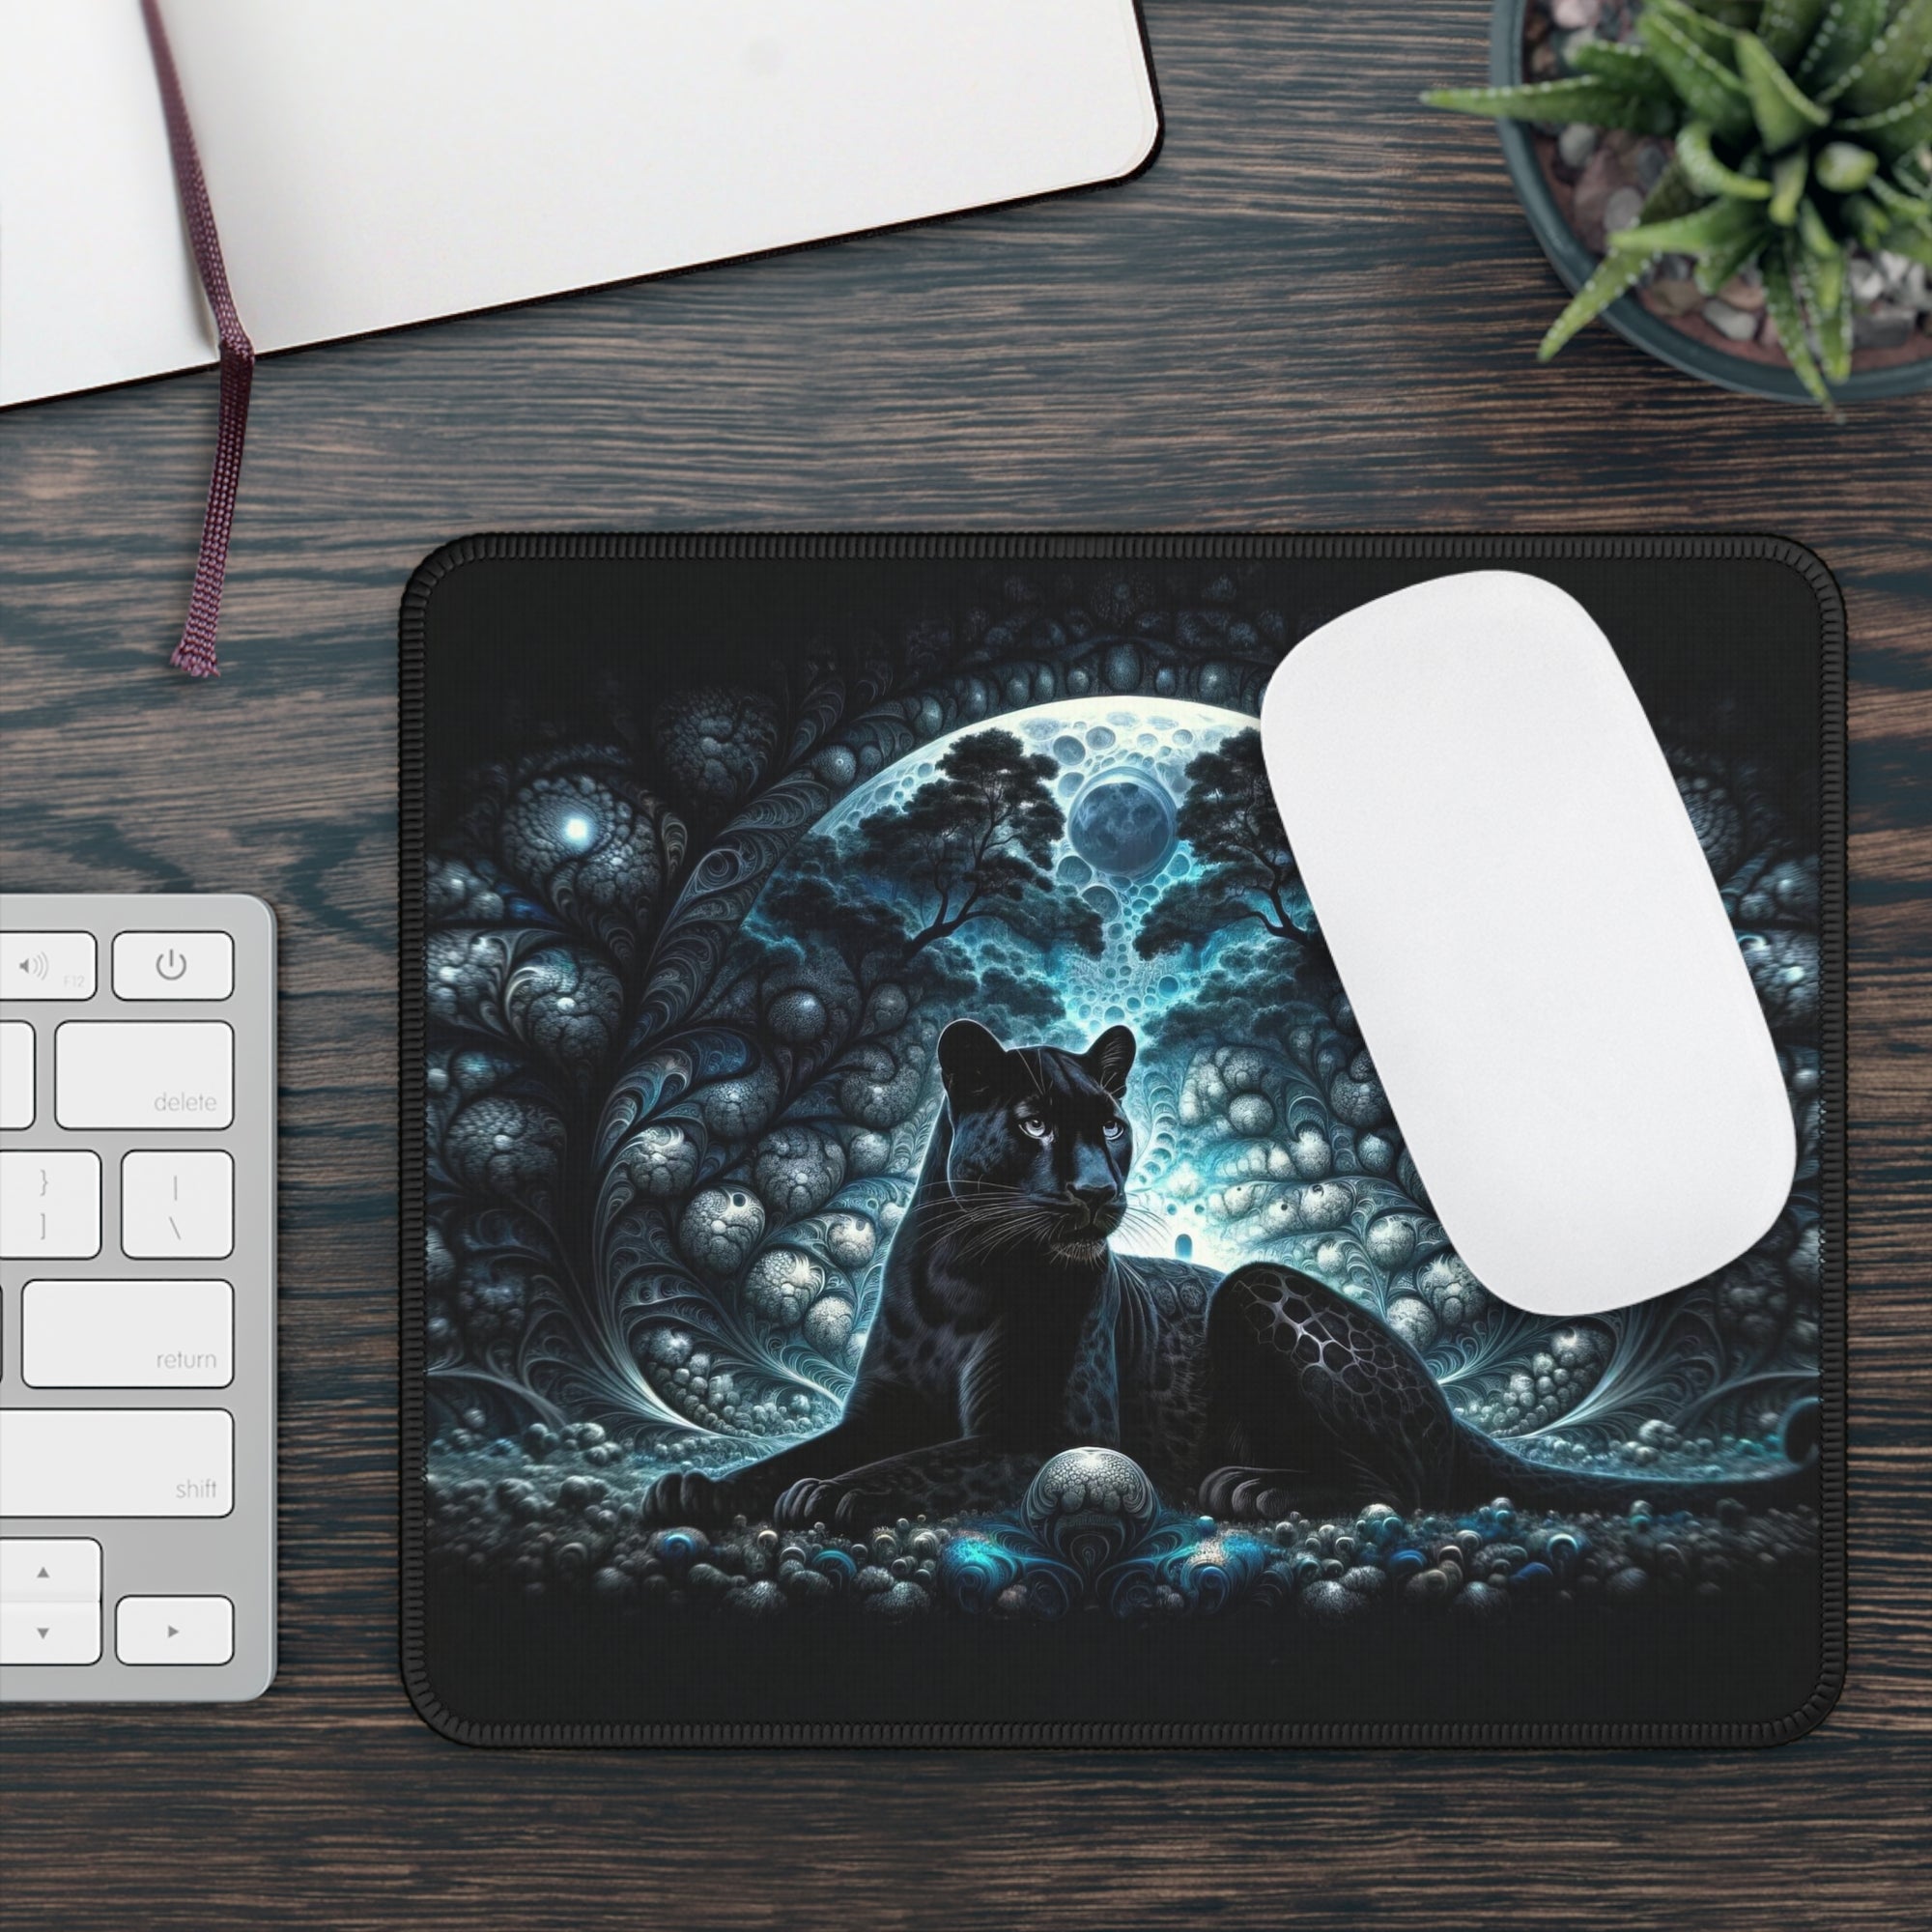 The Black Leopard’s Realm Gaming Mouse Pad